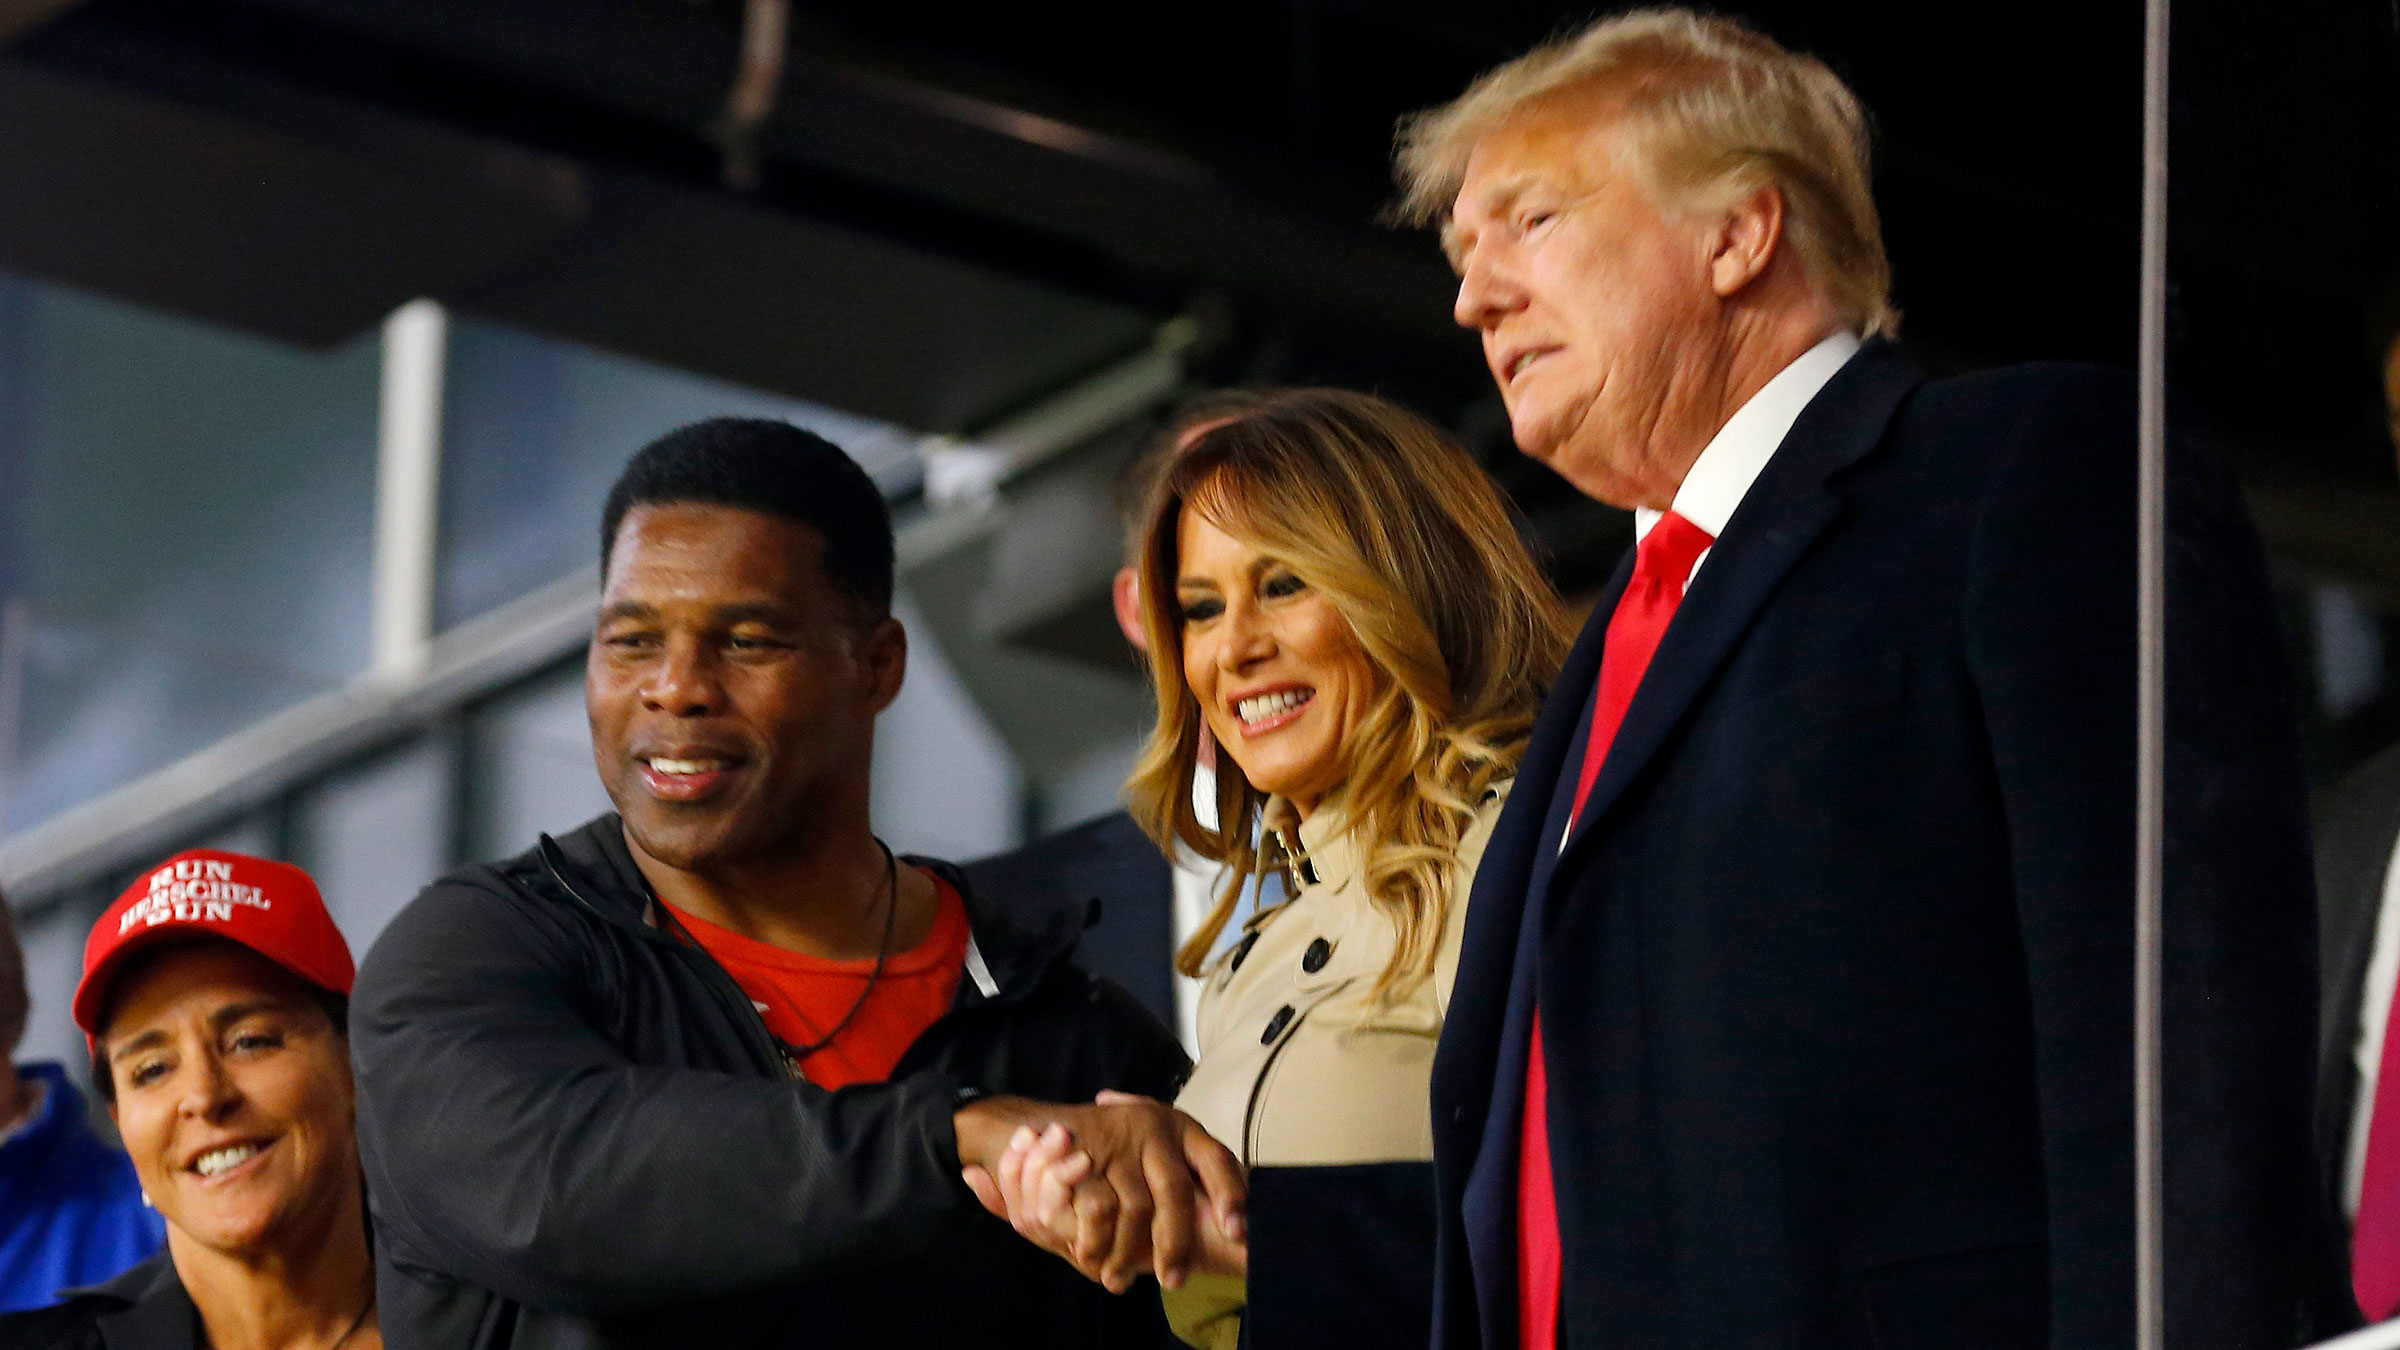 Herschel Walker shakes hands with former President Donald Trump before a World Series game in Atlanta last year.